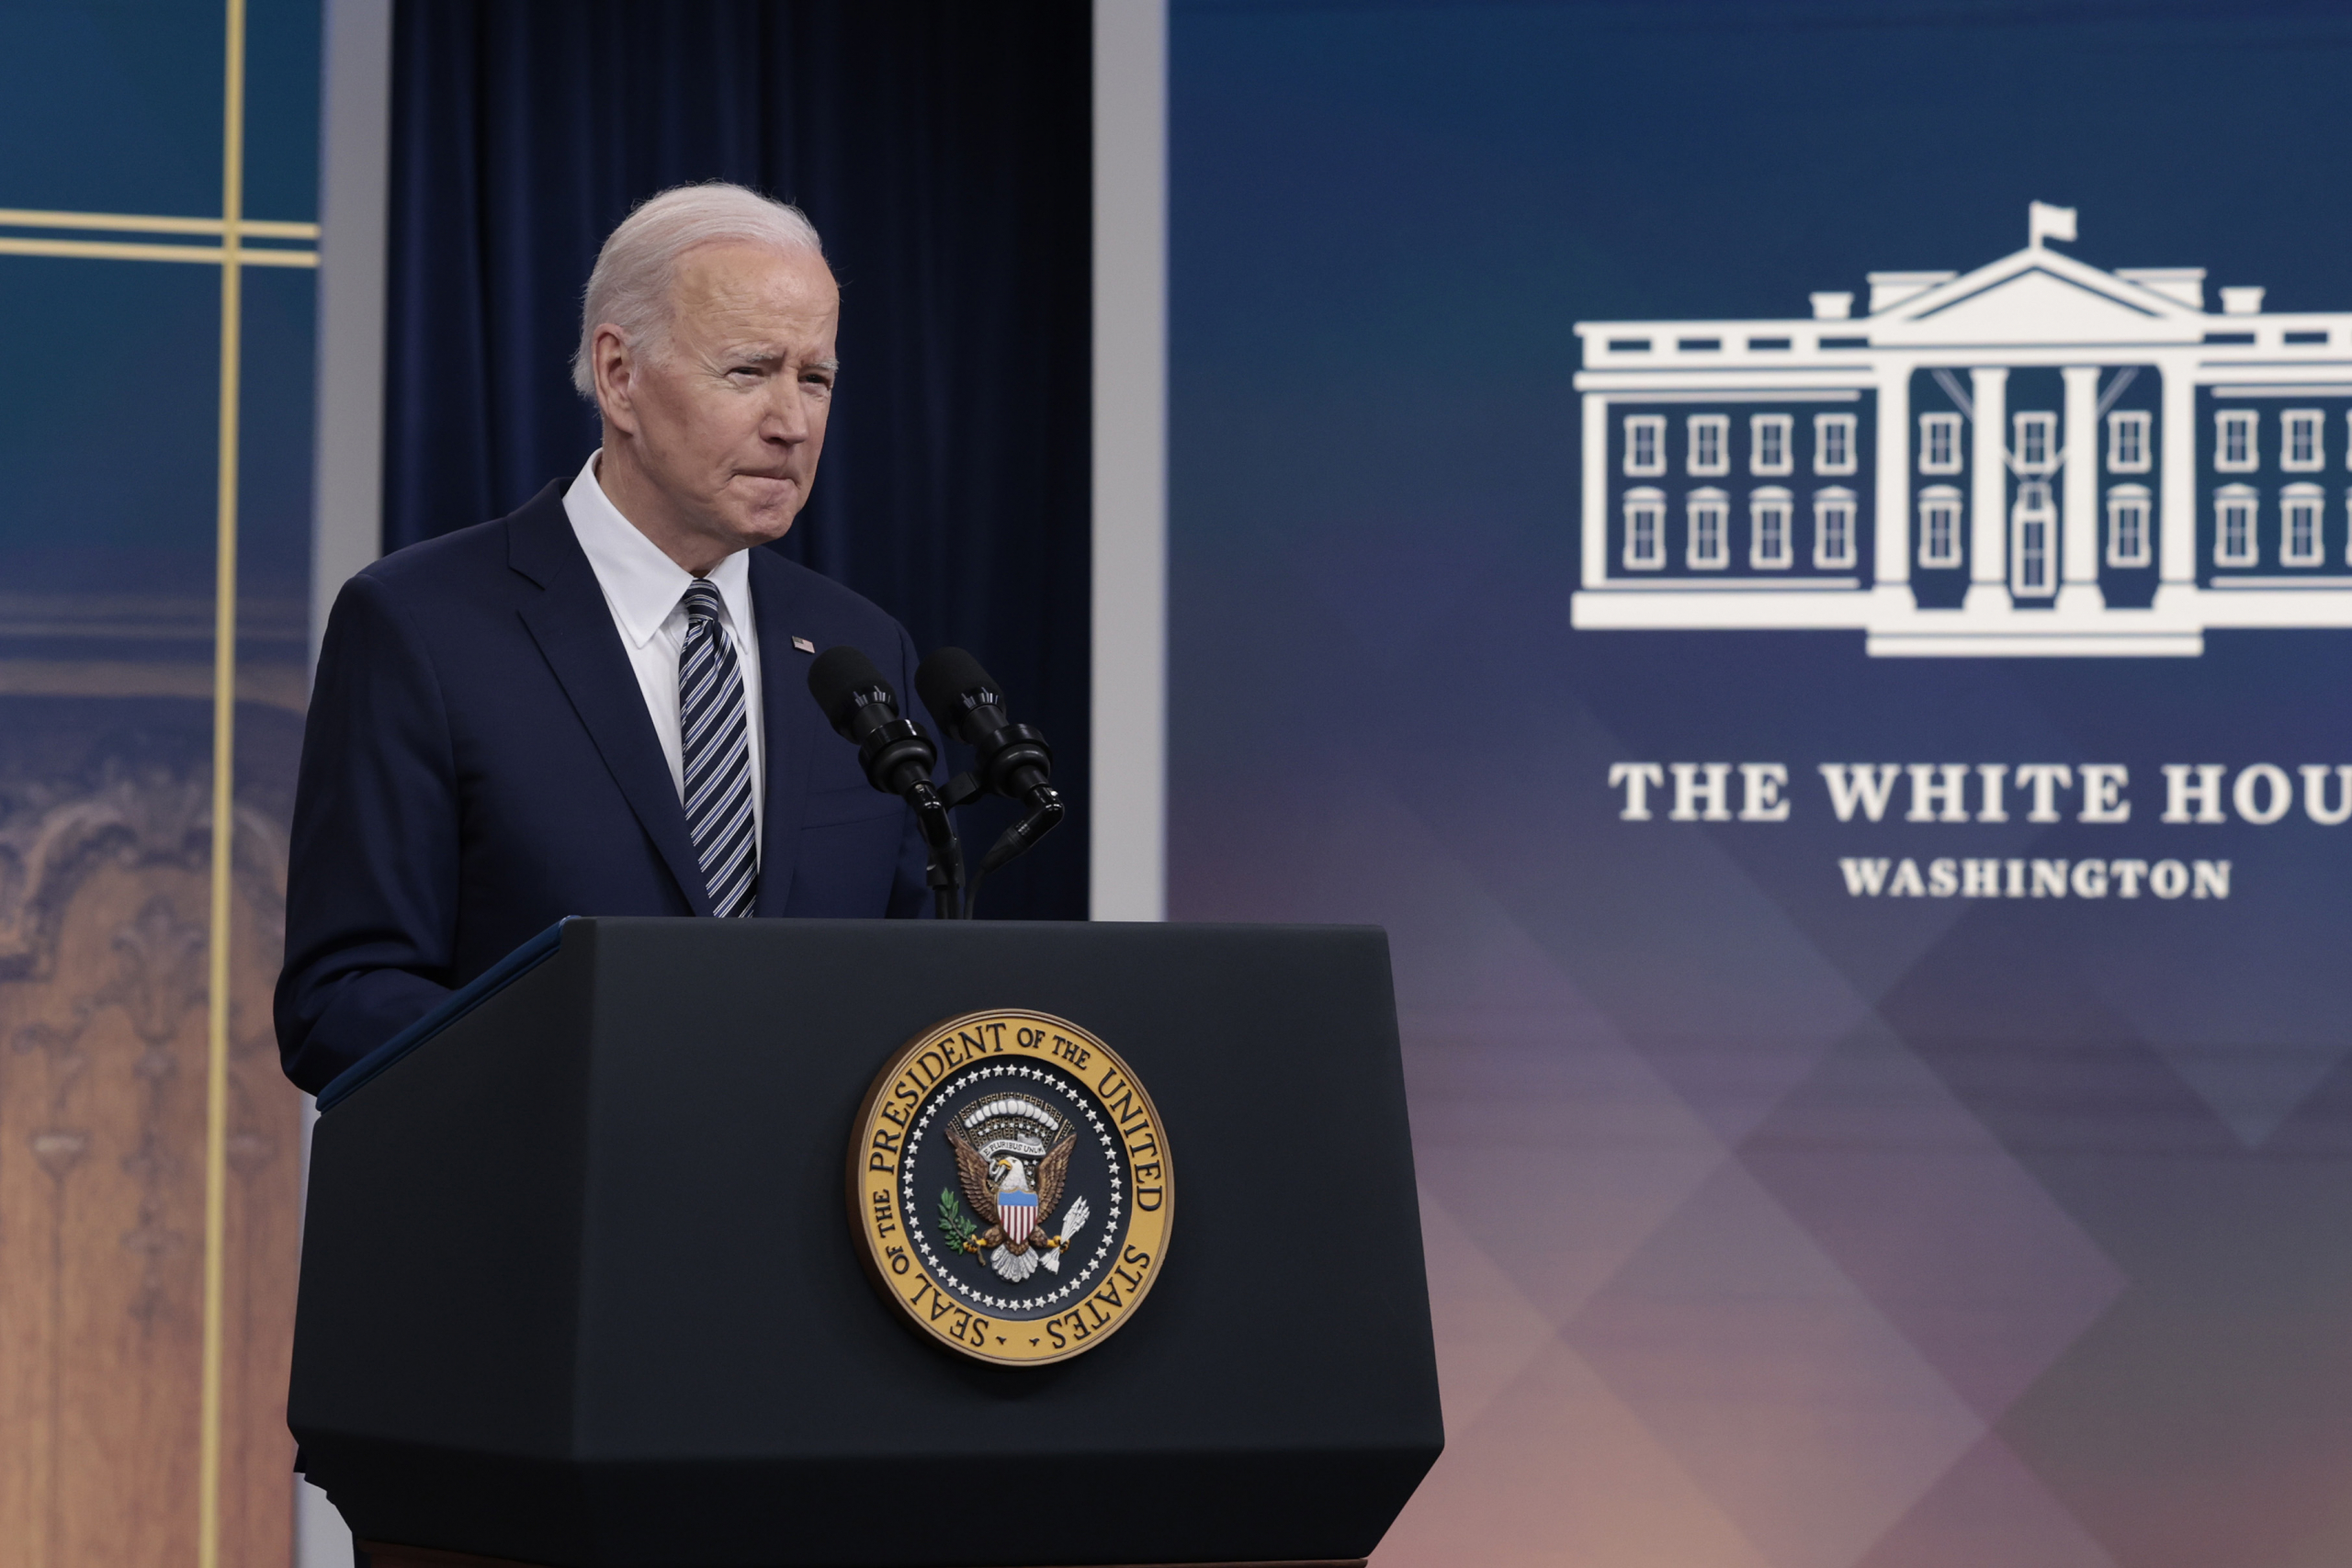 LN Radio 4.3.22 – Spin Over Substance for Biden’s Administration